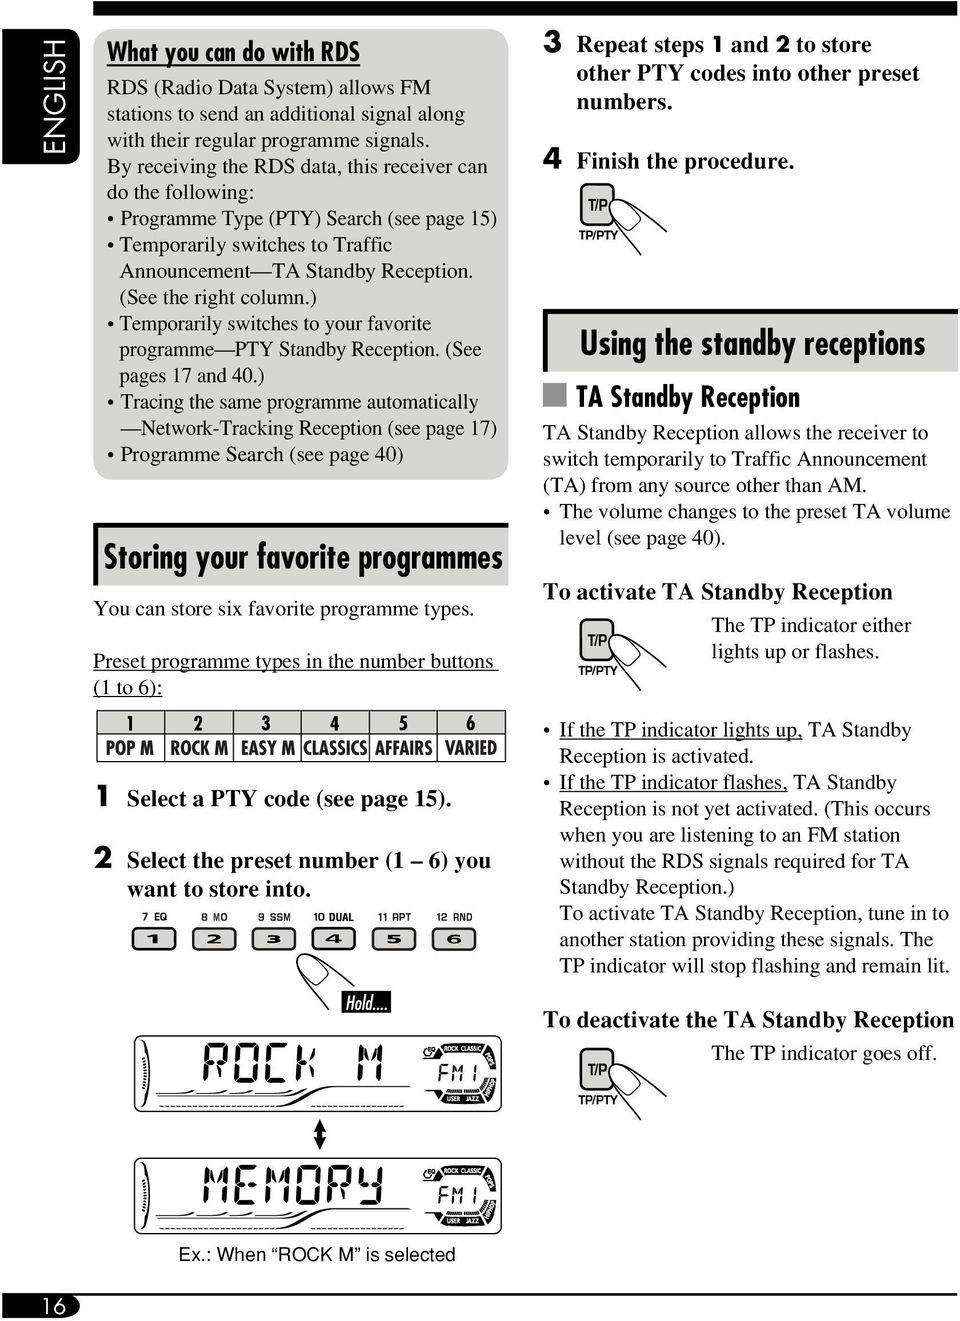 ) Temporarily switches to your favorite programme PTY Standby Reception. (See pages 17 and 40.